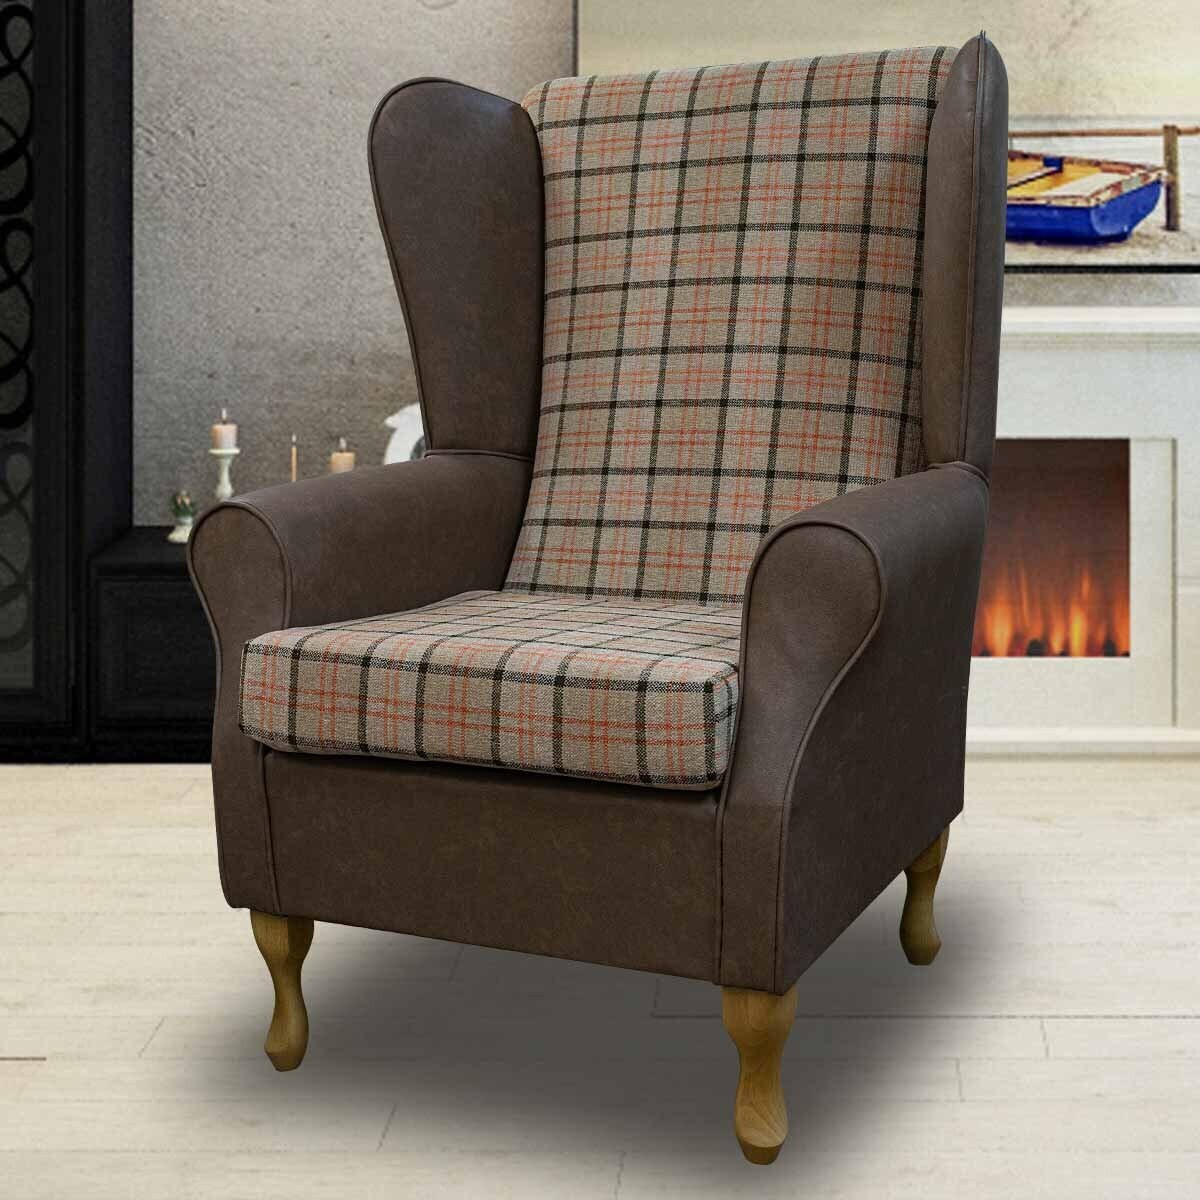 LUXE Large Highback Wingback Fireside Armchair Chair in a Lana 